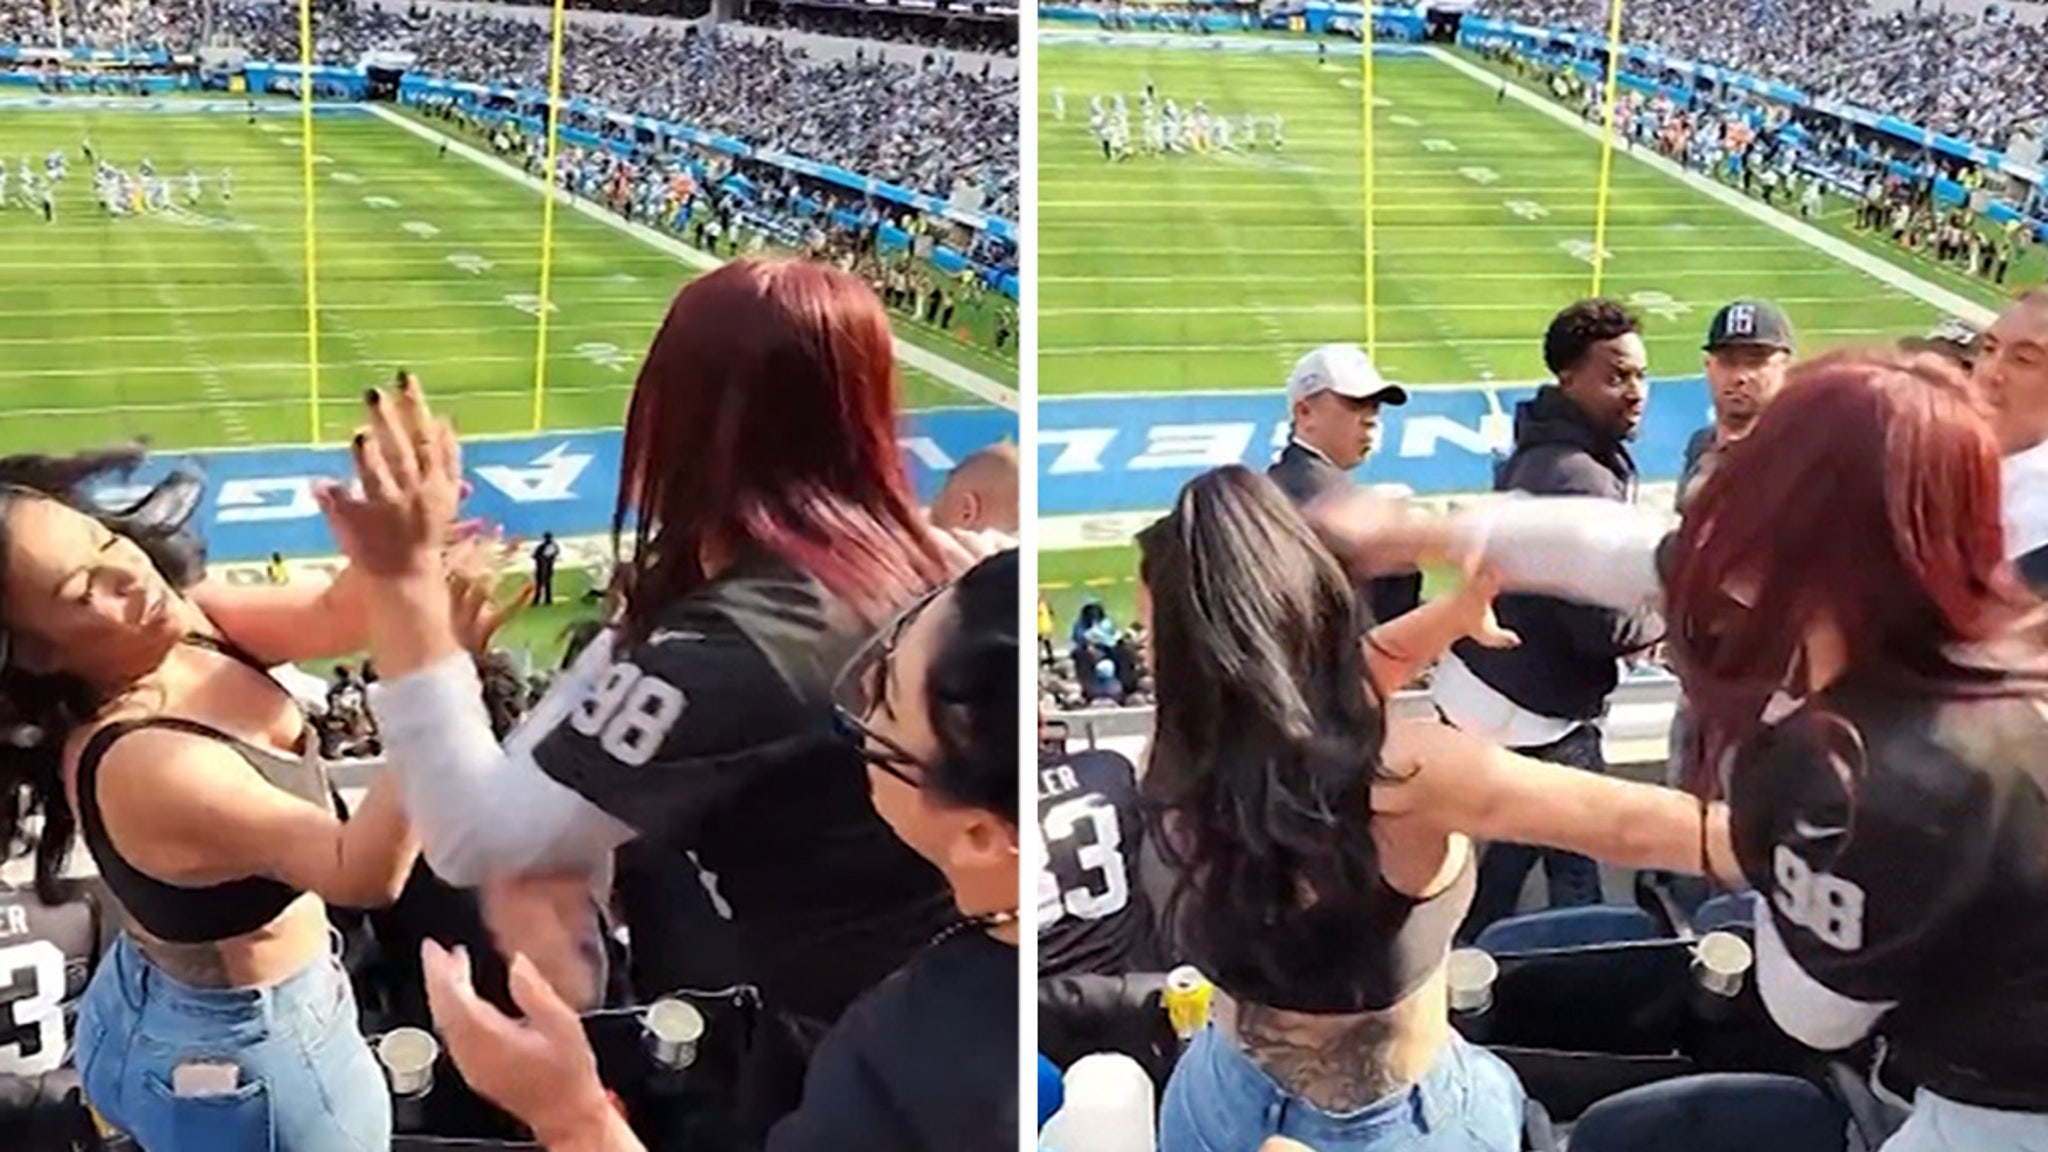 Two women engage in violent brawl in the stands during Raiders game